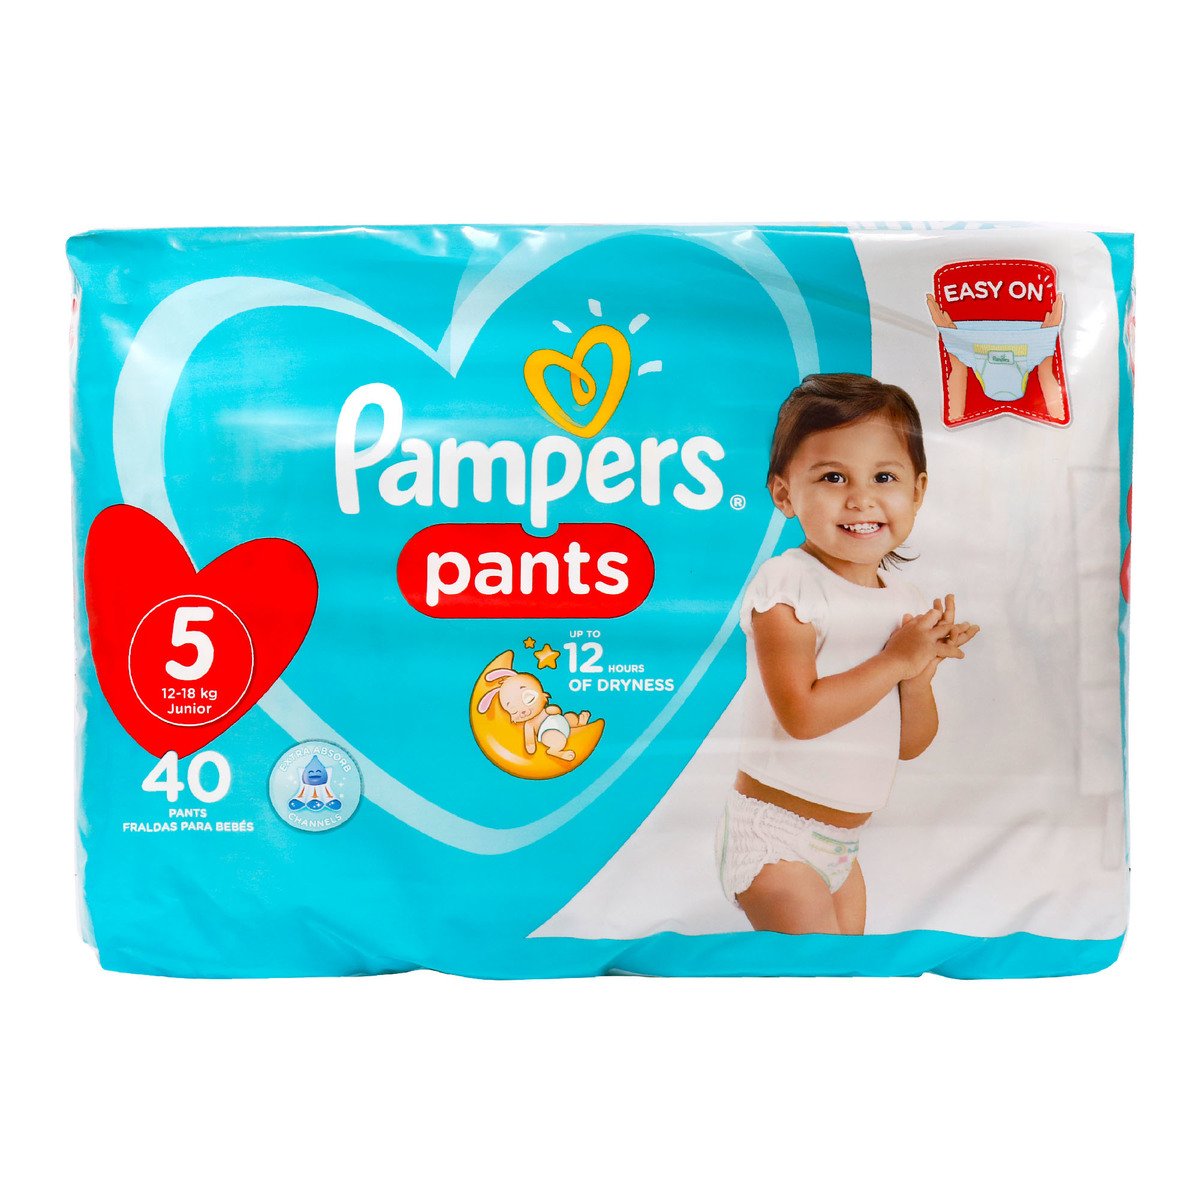 Pampers Diaper Pants Value Pack Size 5 12-18kg 40 Count